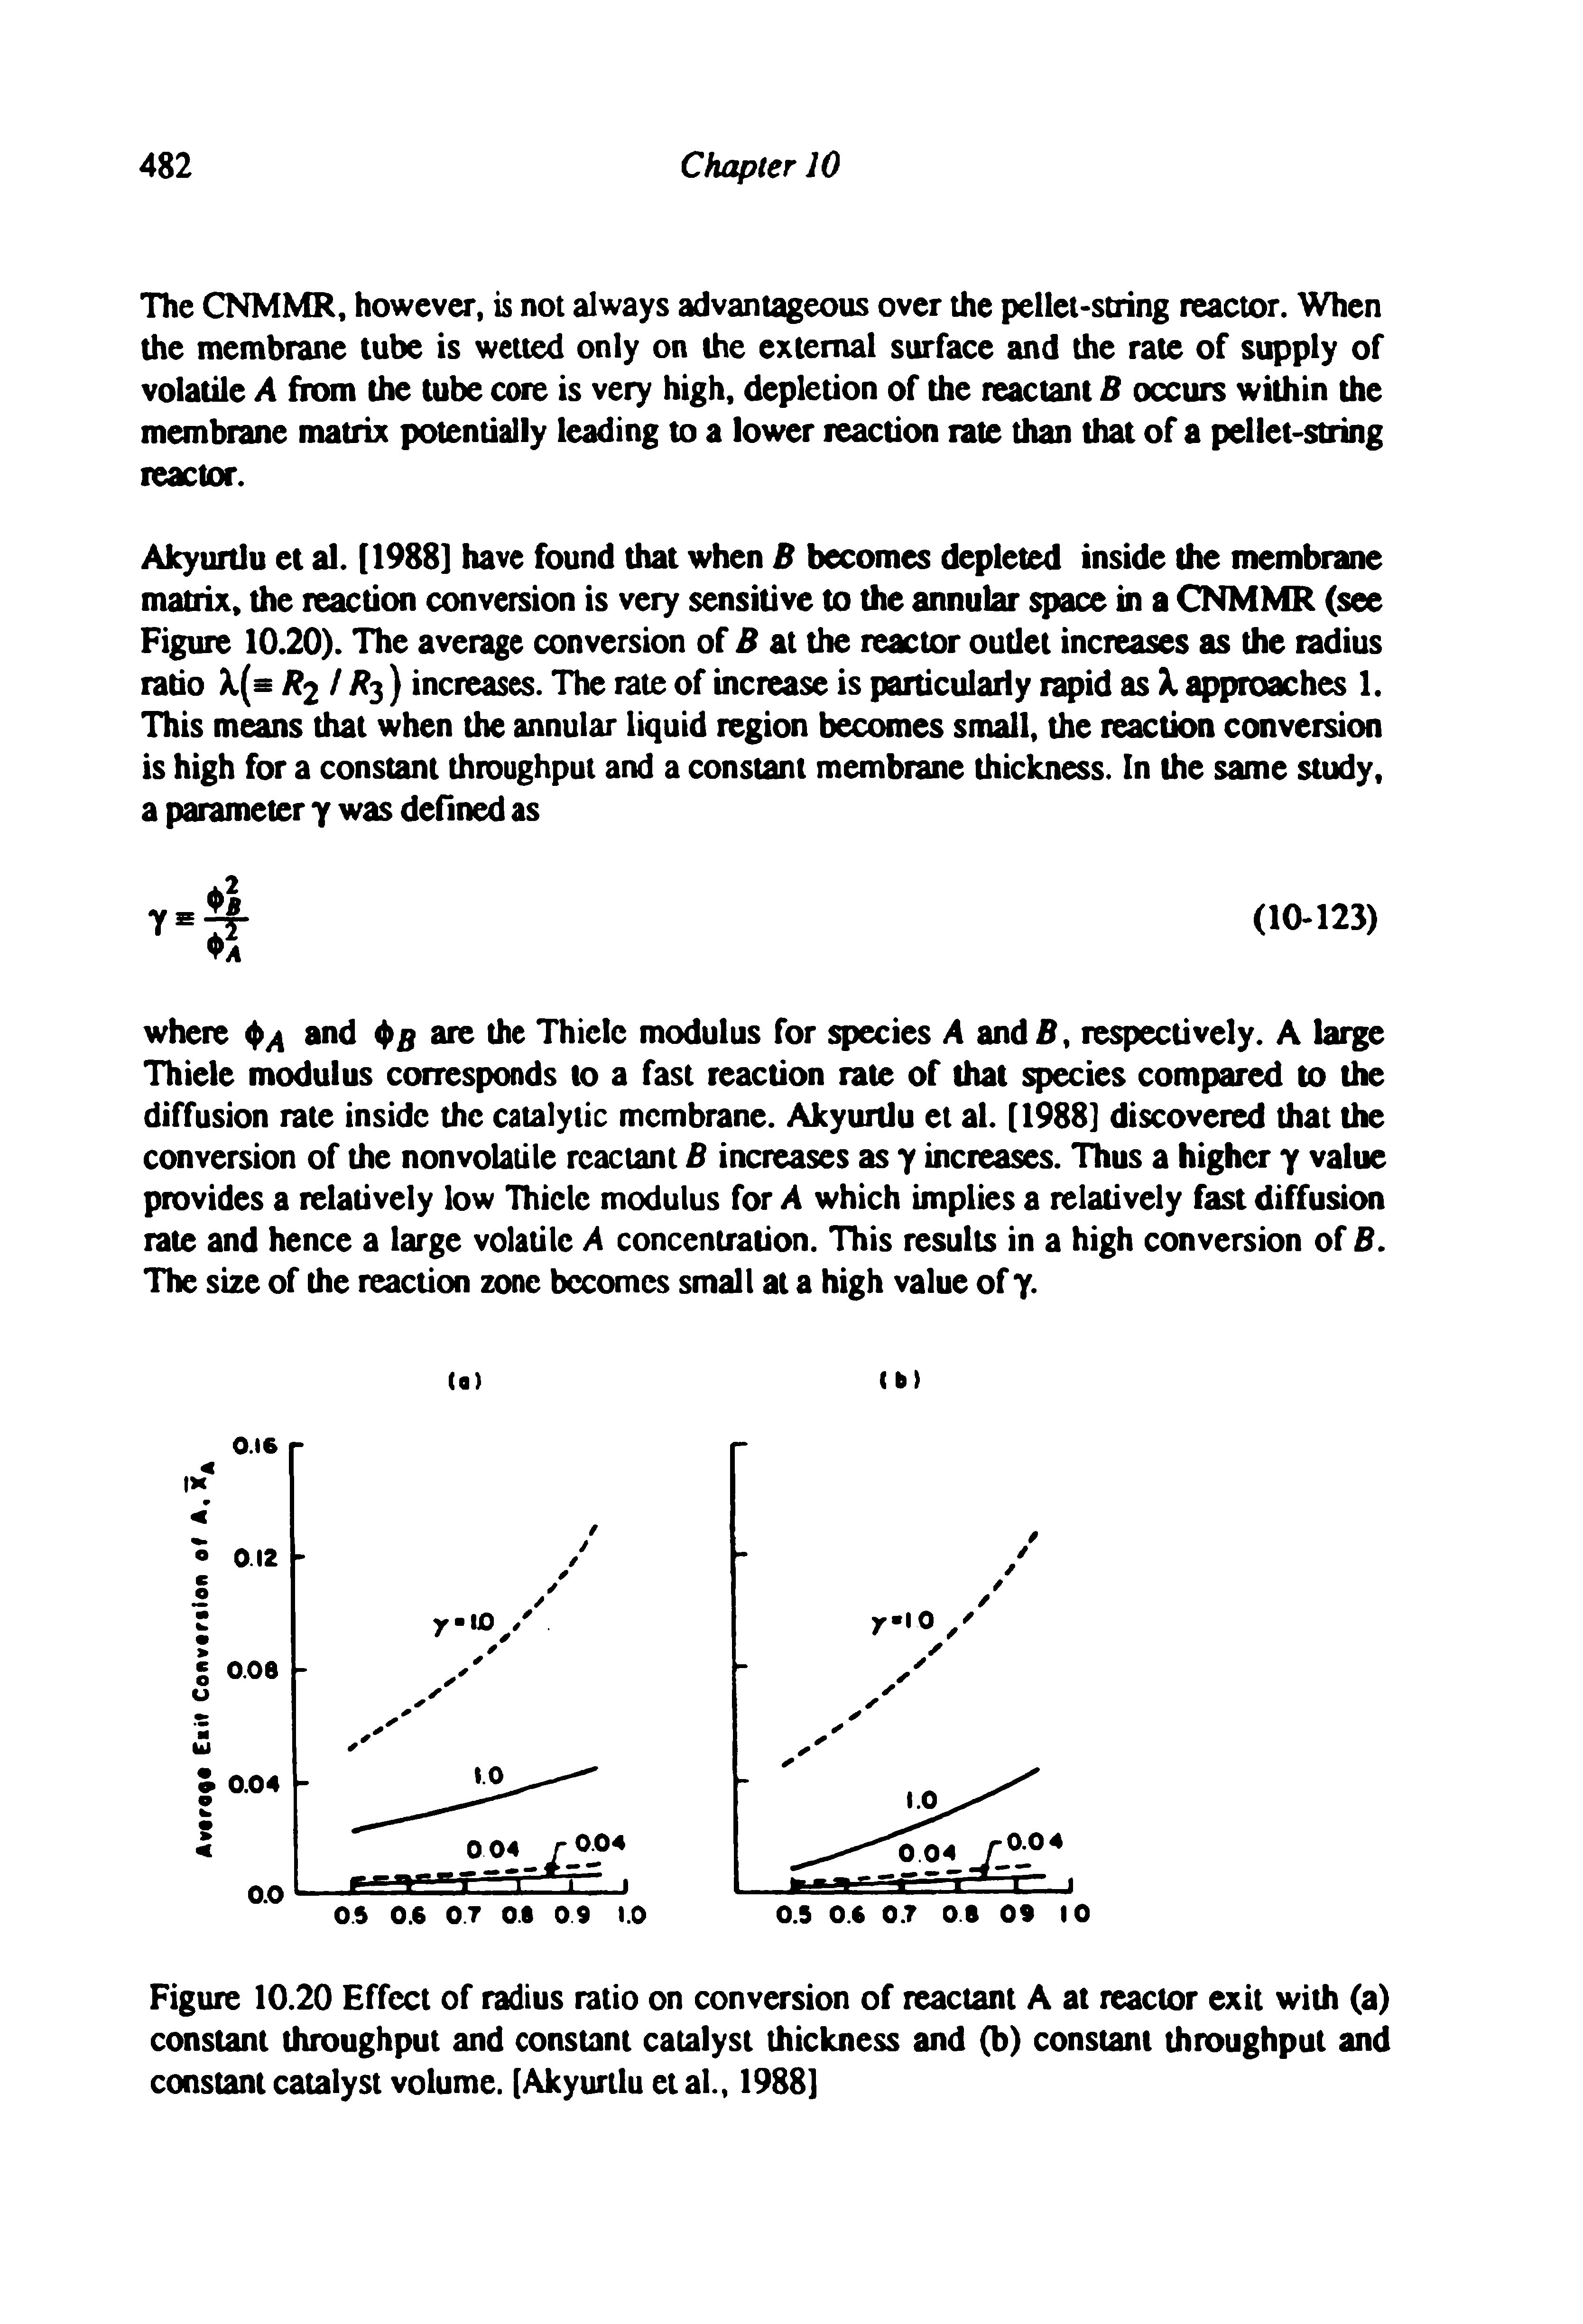 Figure 10.20 Effect of radius ratio on conversion of reactant A at reactor exit with (a) constant throughput and constant catalyst thickness and (b) constant throughput and constant catalyst volume. [Akyurtlu et al., 1988]...